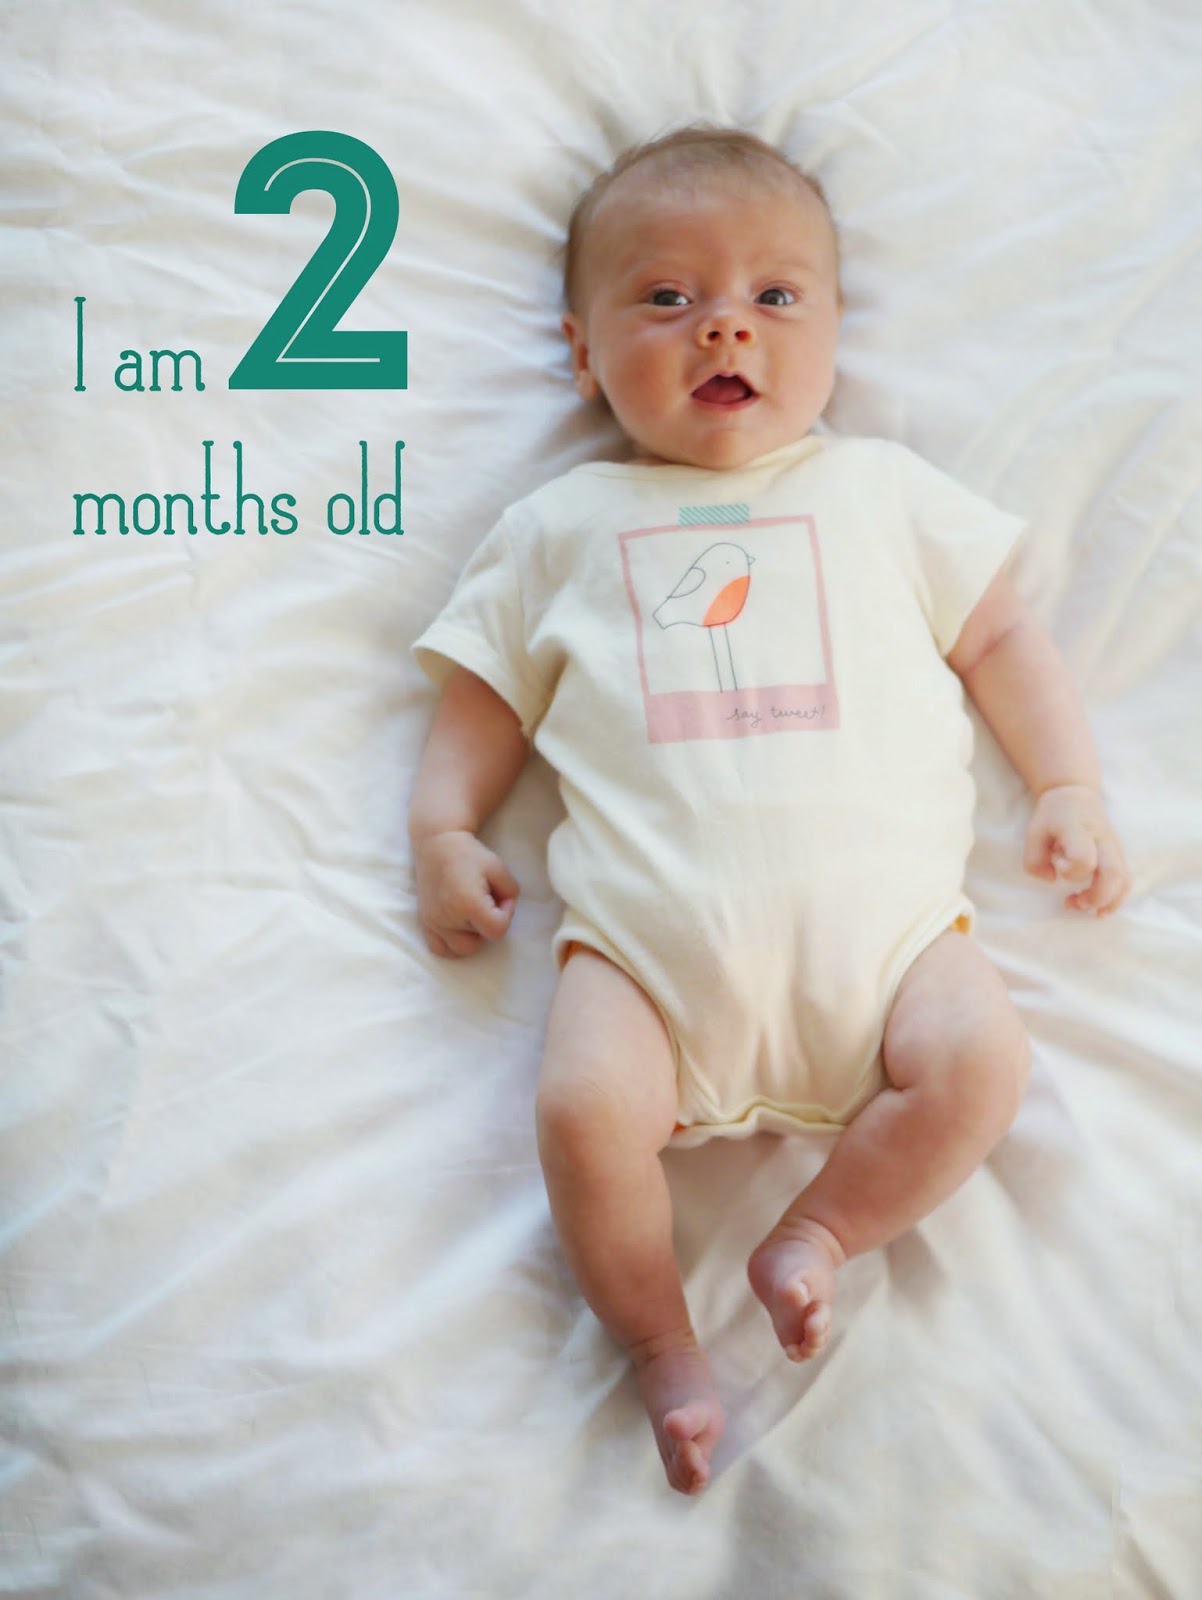 2 months old. 2 Months Baby. 2 Months old Baby. Two months Baby. 2 Months Baby фото.